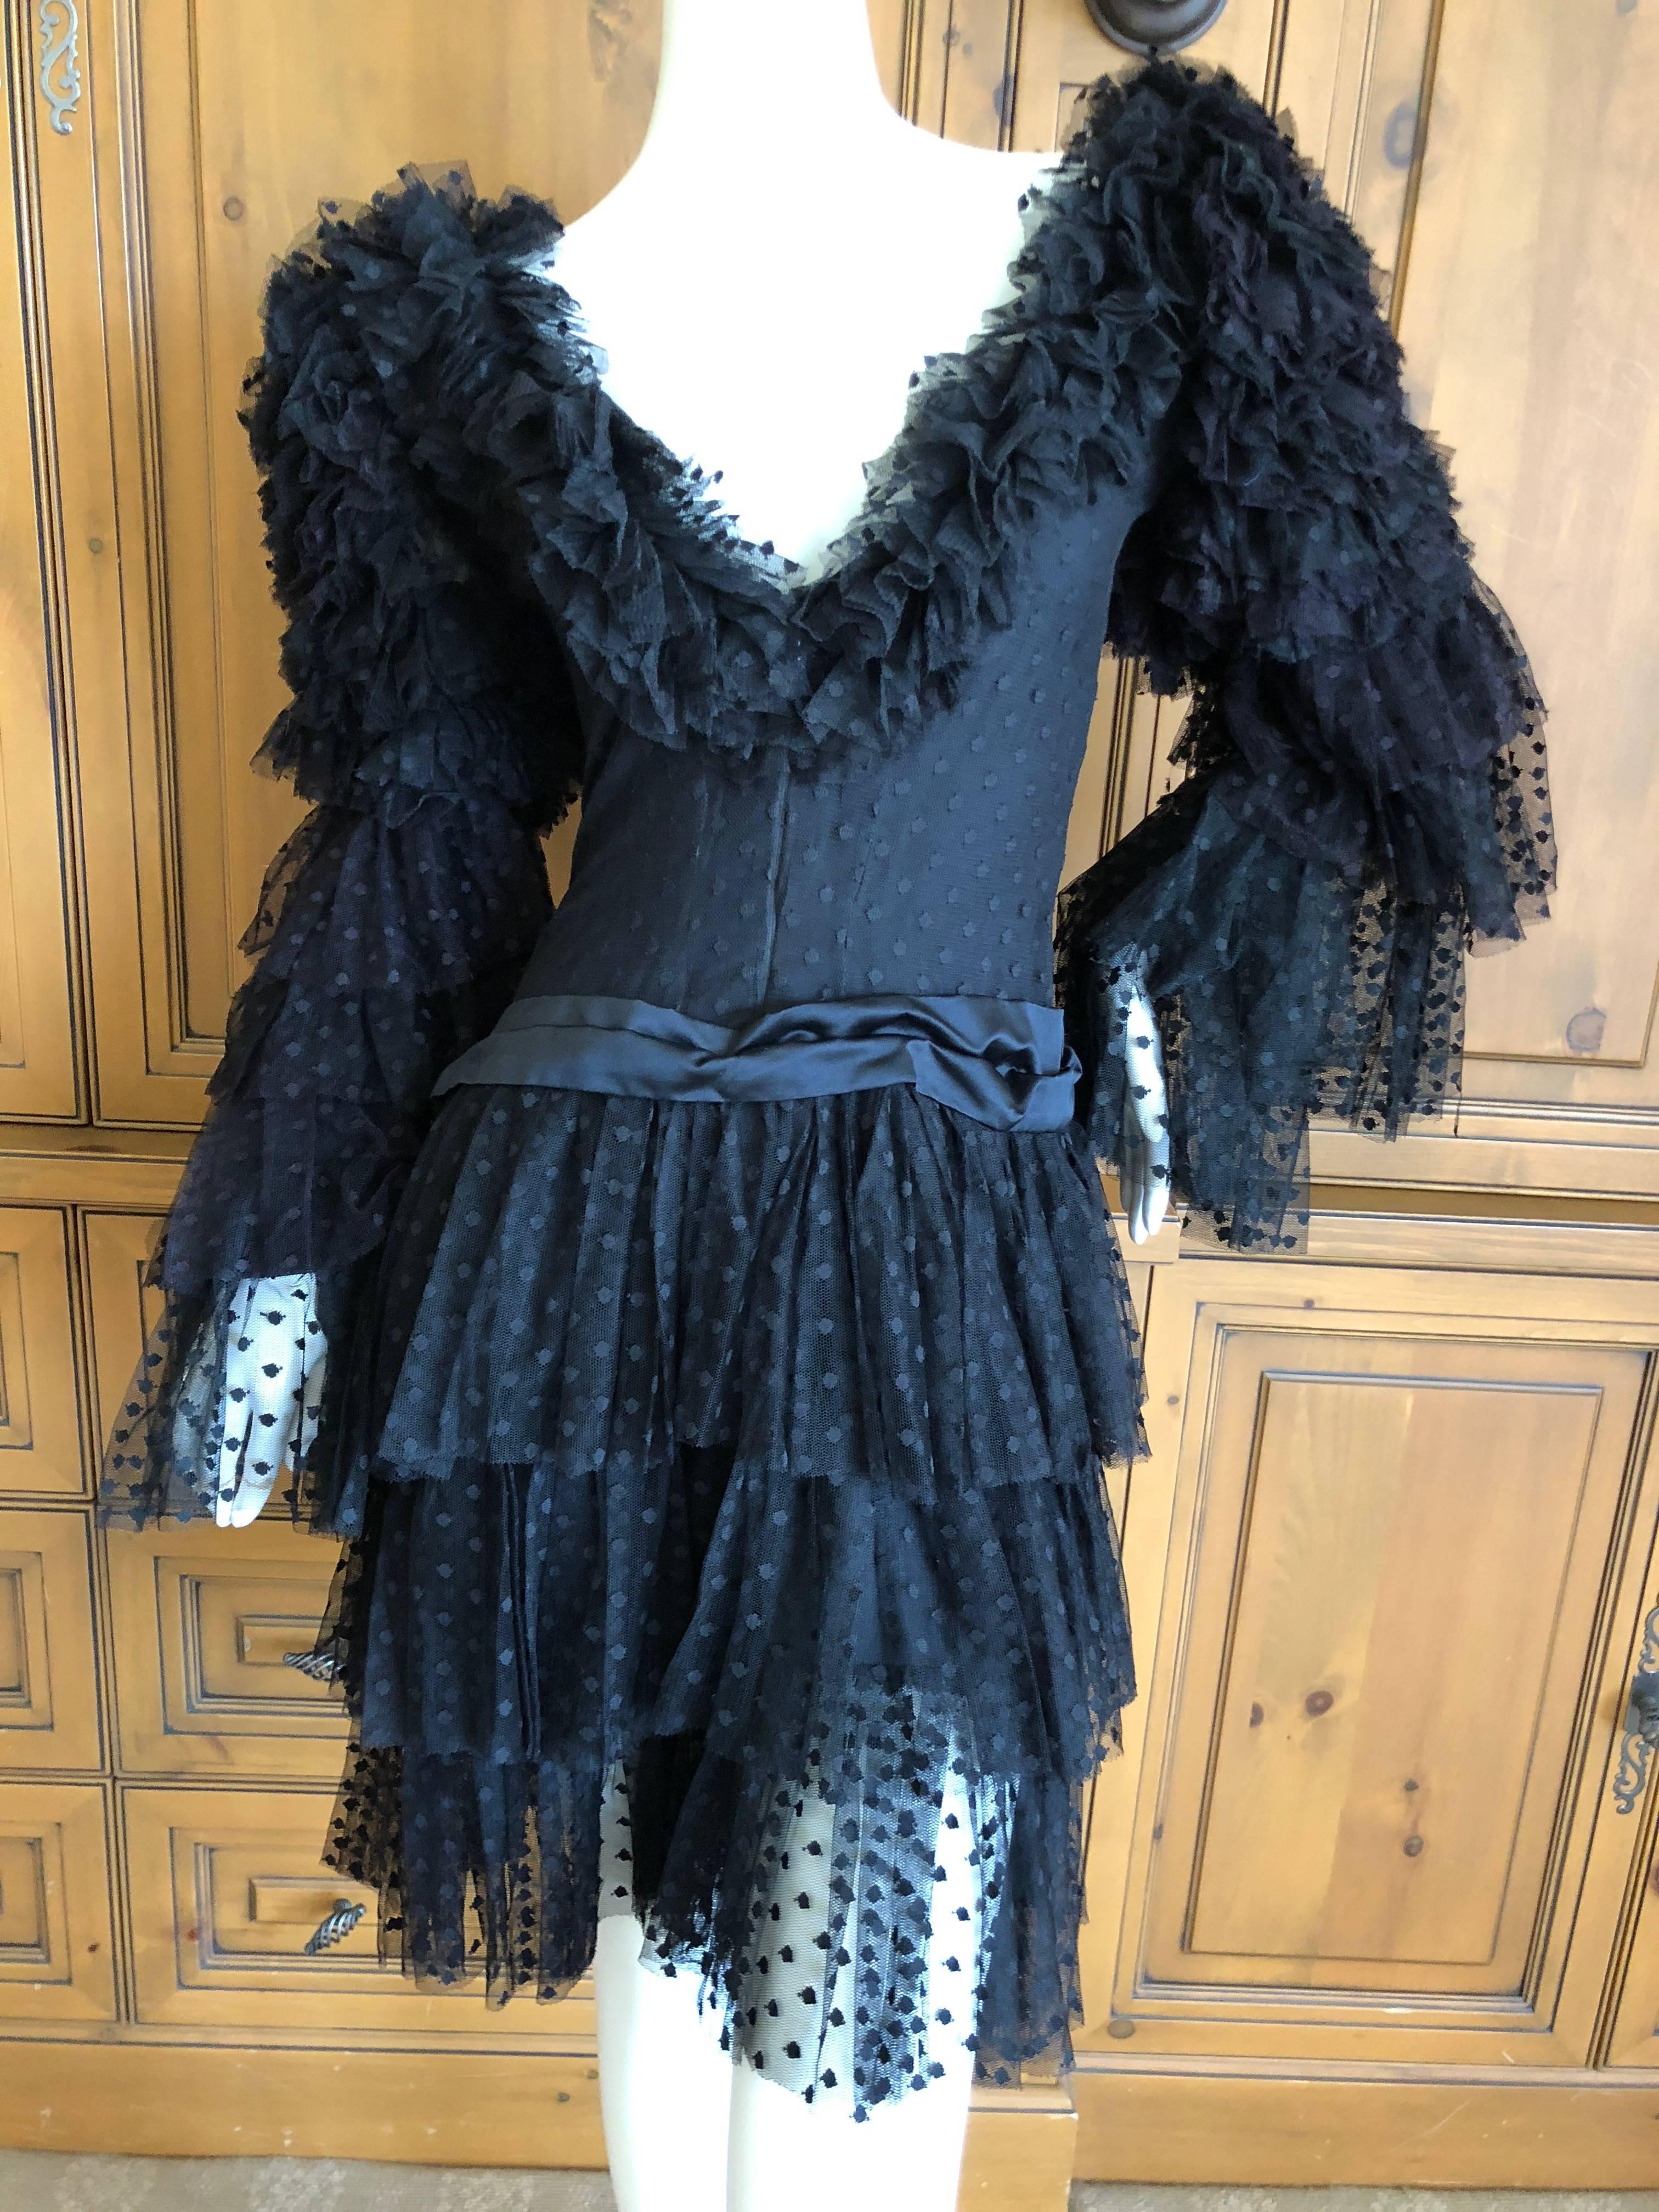 Cardinali Dramatic Black Ruffled Poet Sleeve Silk Cocktail Dress.
I haven't a clue which is the front or back, I show it both ways.

From the Archive of Marilyn Lewis, the creator of Cardinali
Cardinali was founded in Los Angeles in 1970, by Marilyn